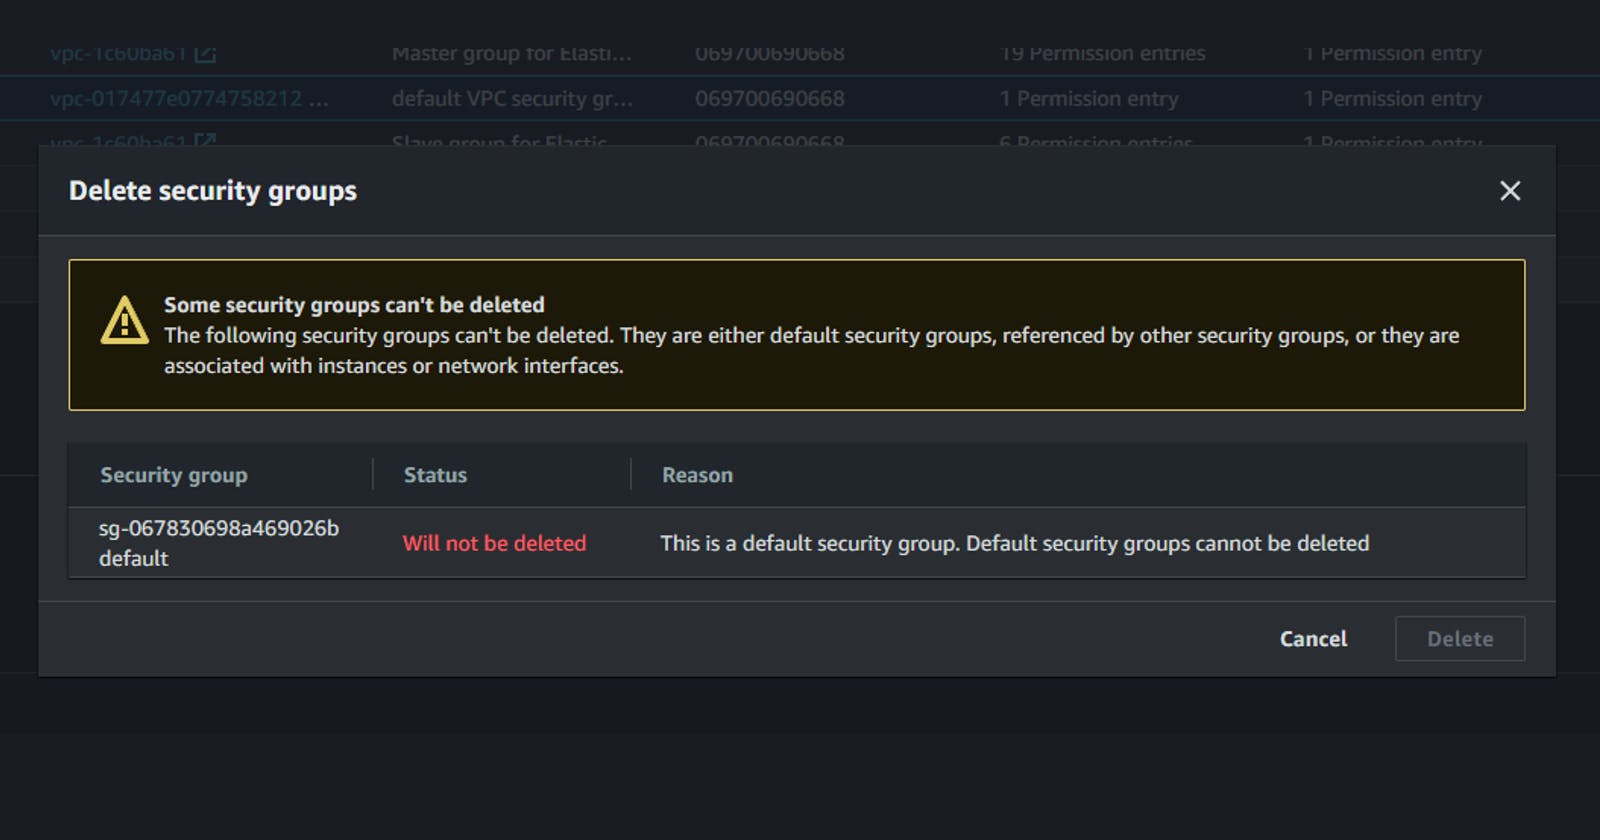 Why I Am Not Able to Remove a Security Group?